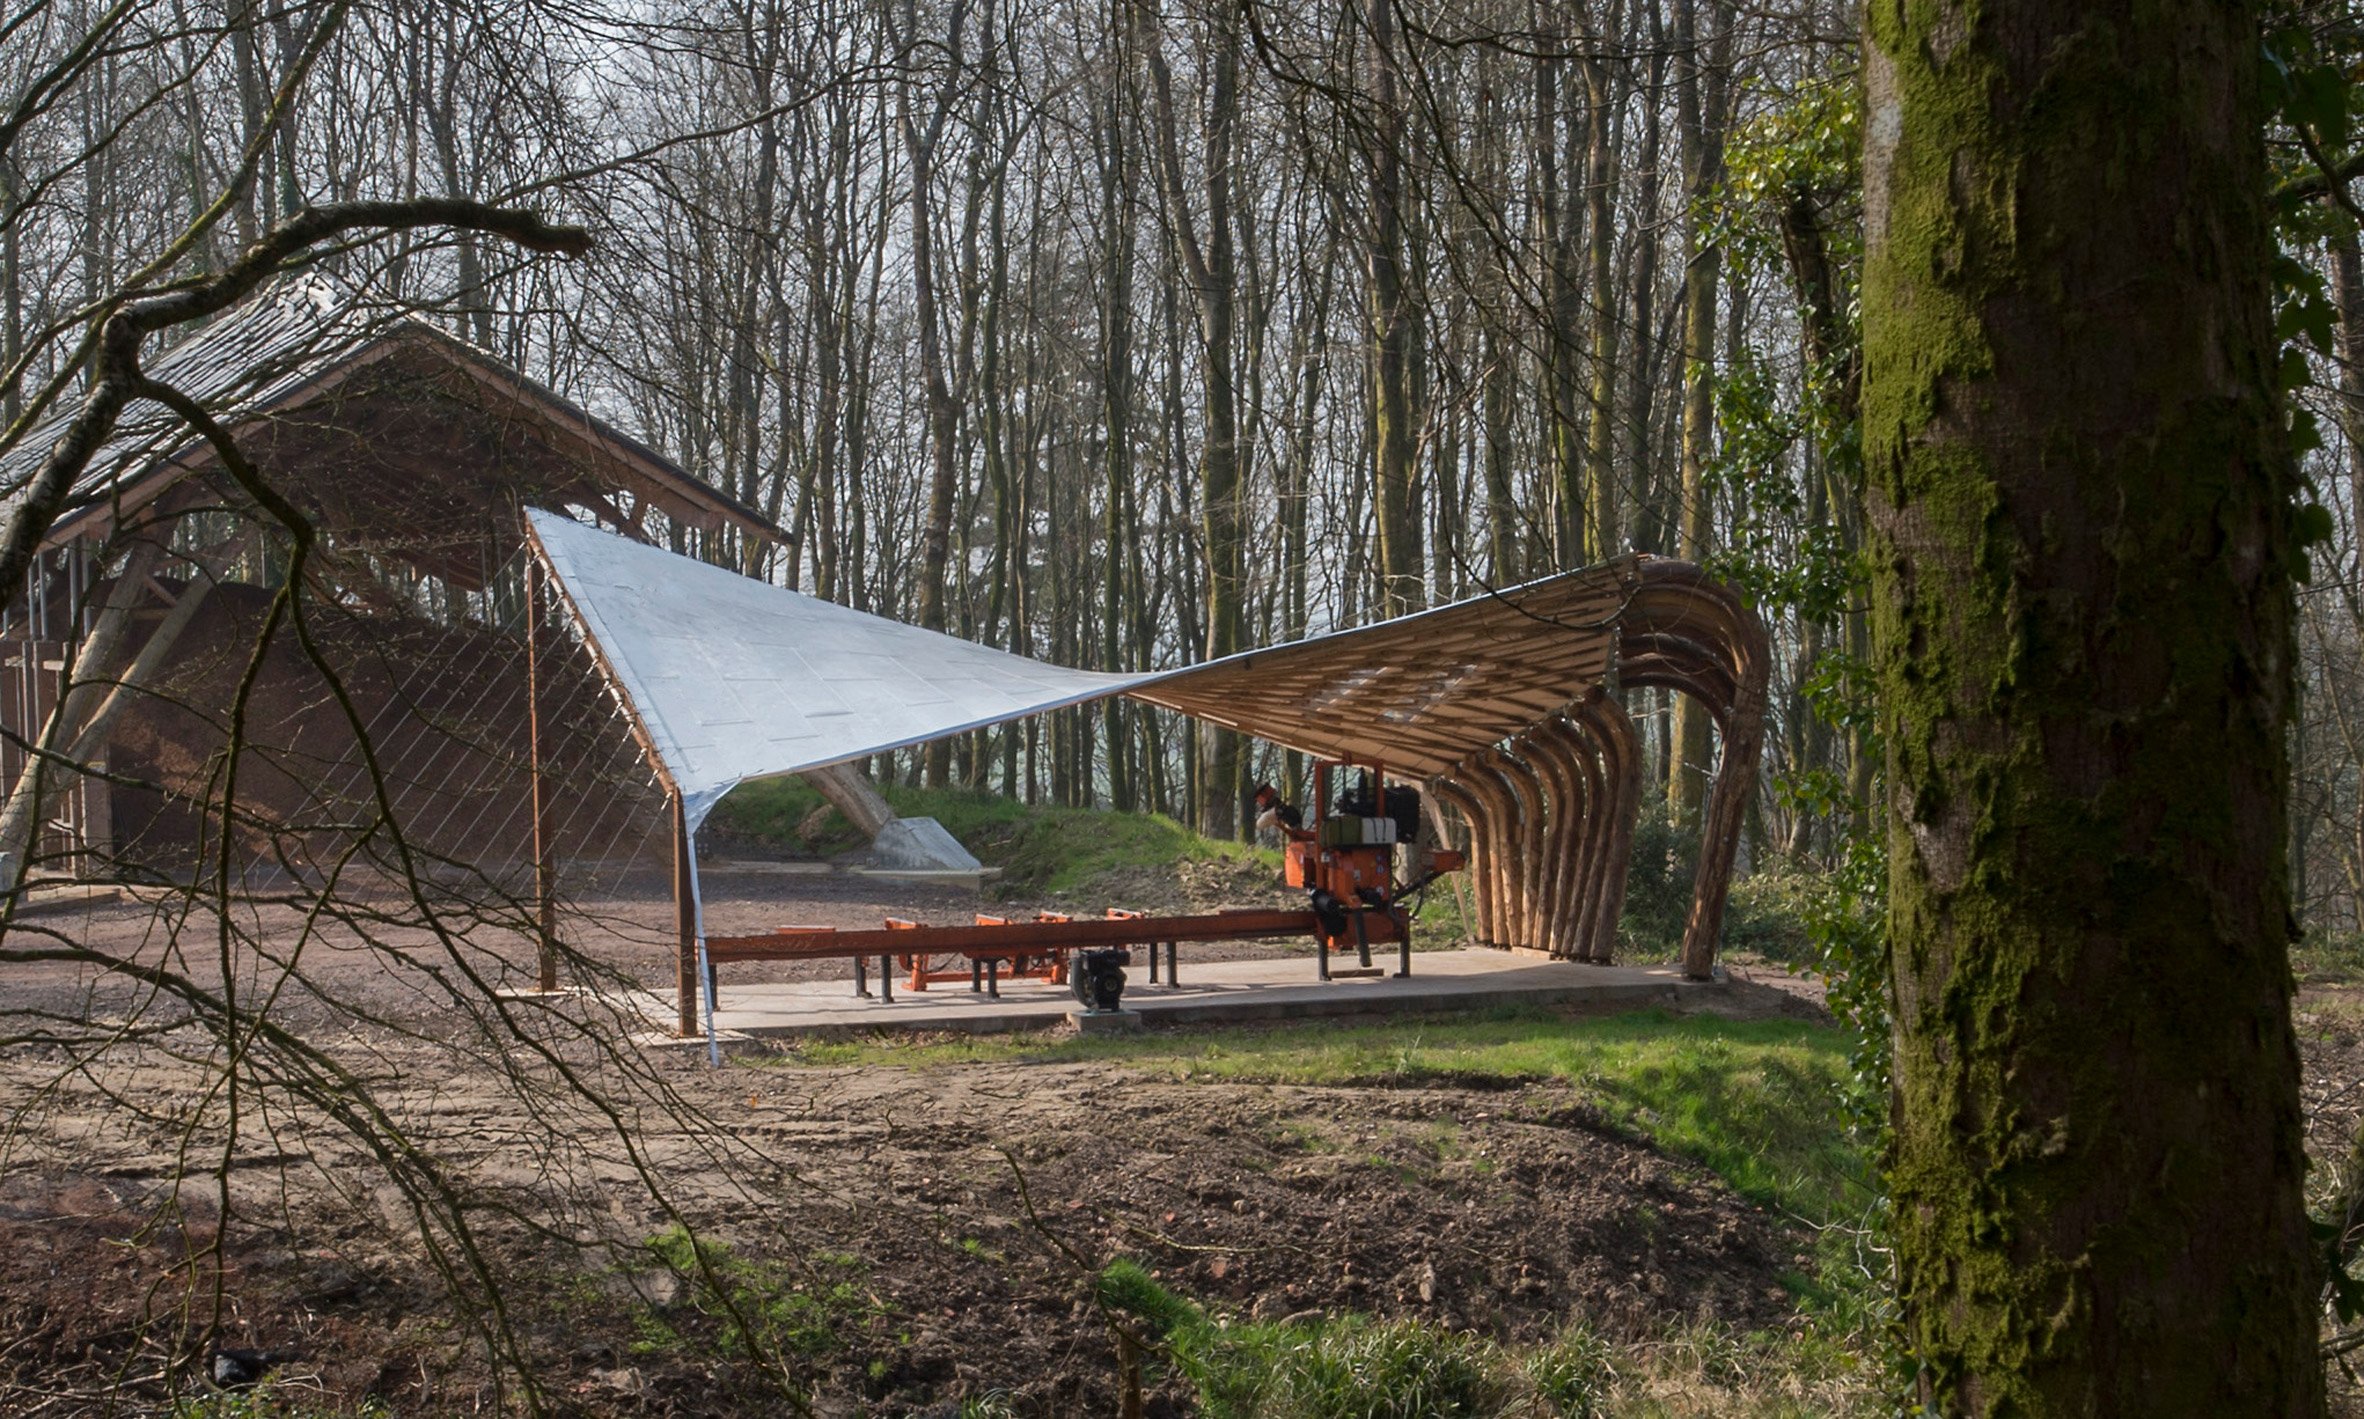 Sawmill Shelter by Architectural Association students, Design + Make programme